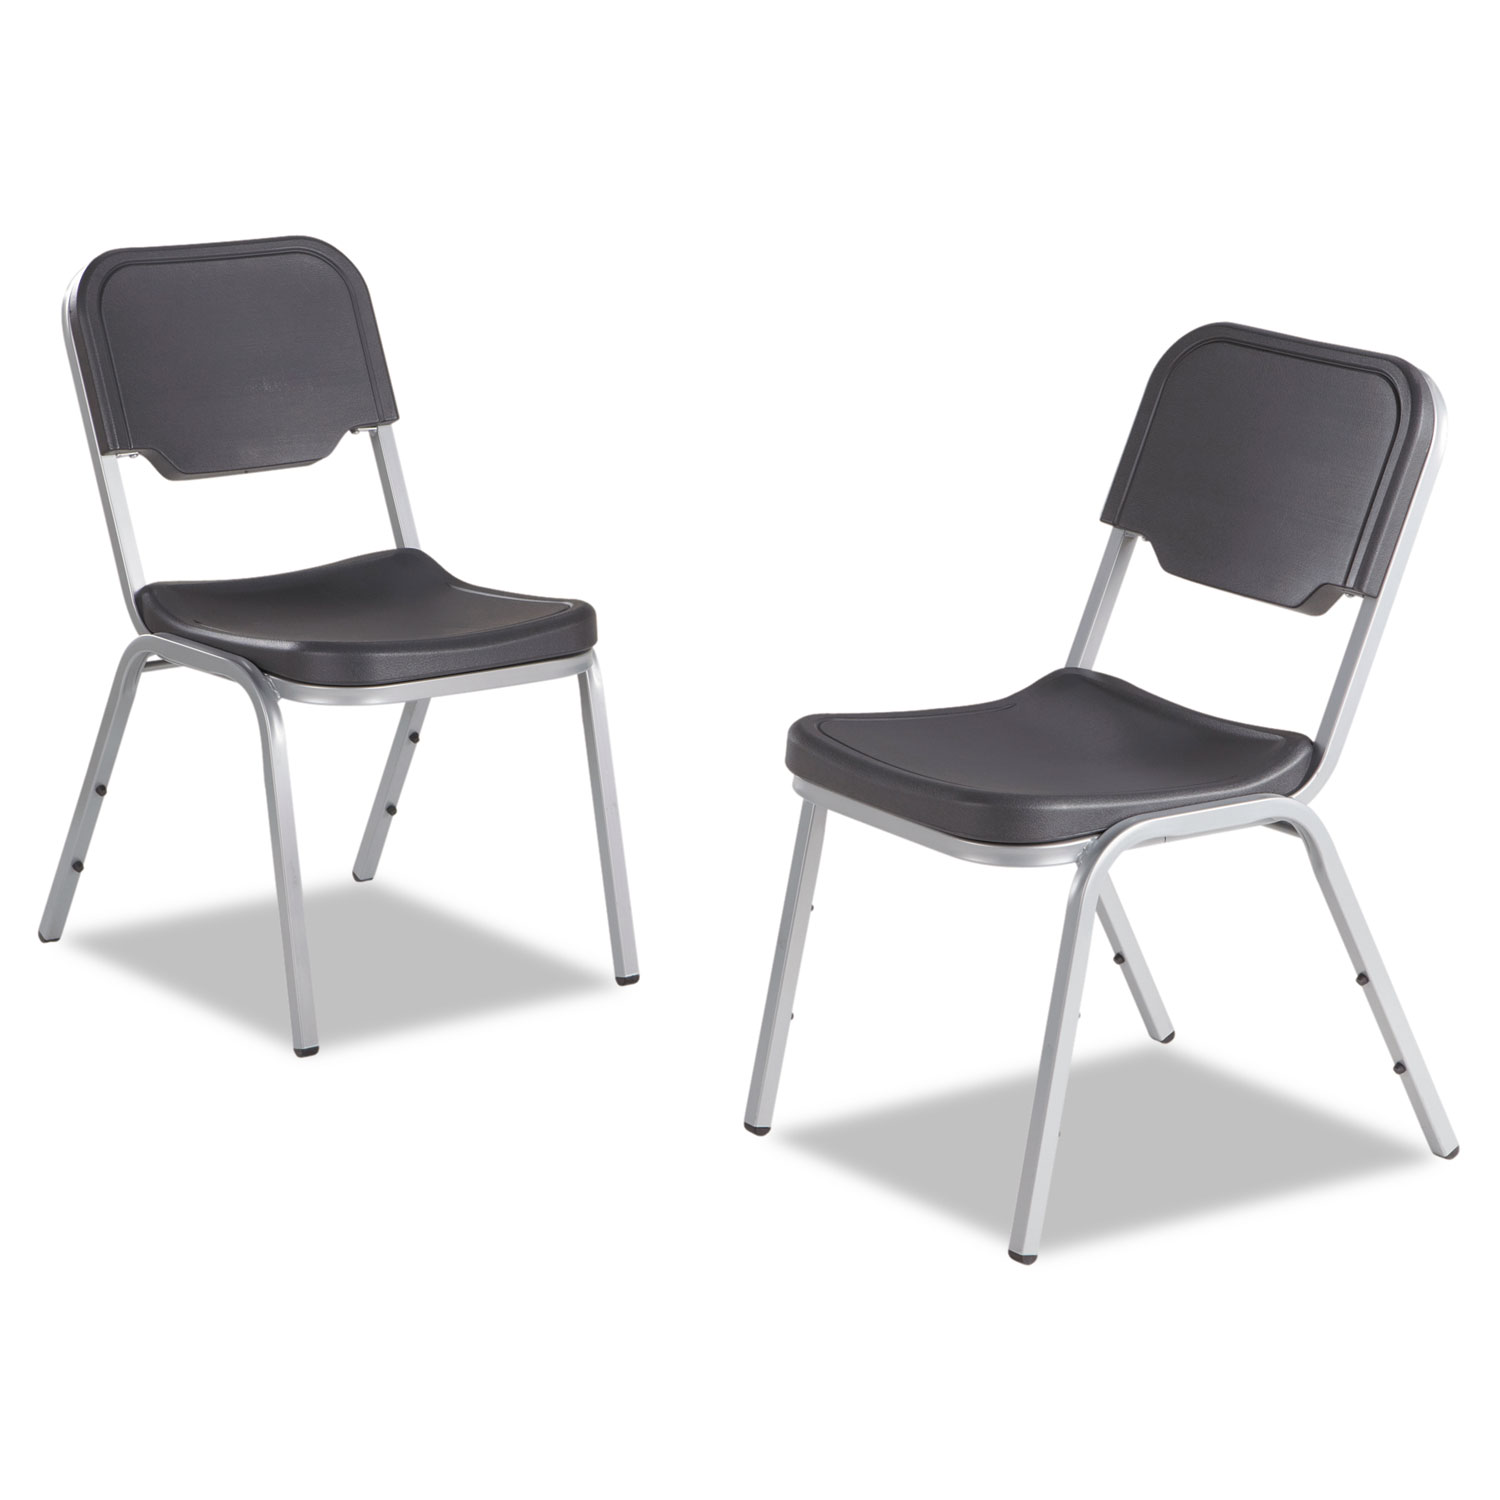 Rough 'N Ready Original Stack Chair, Charcoal Seat/Charcoal Back, Silver Base, 4/Carton